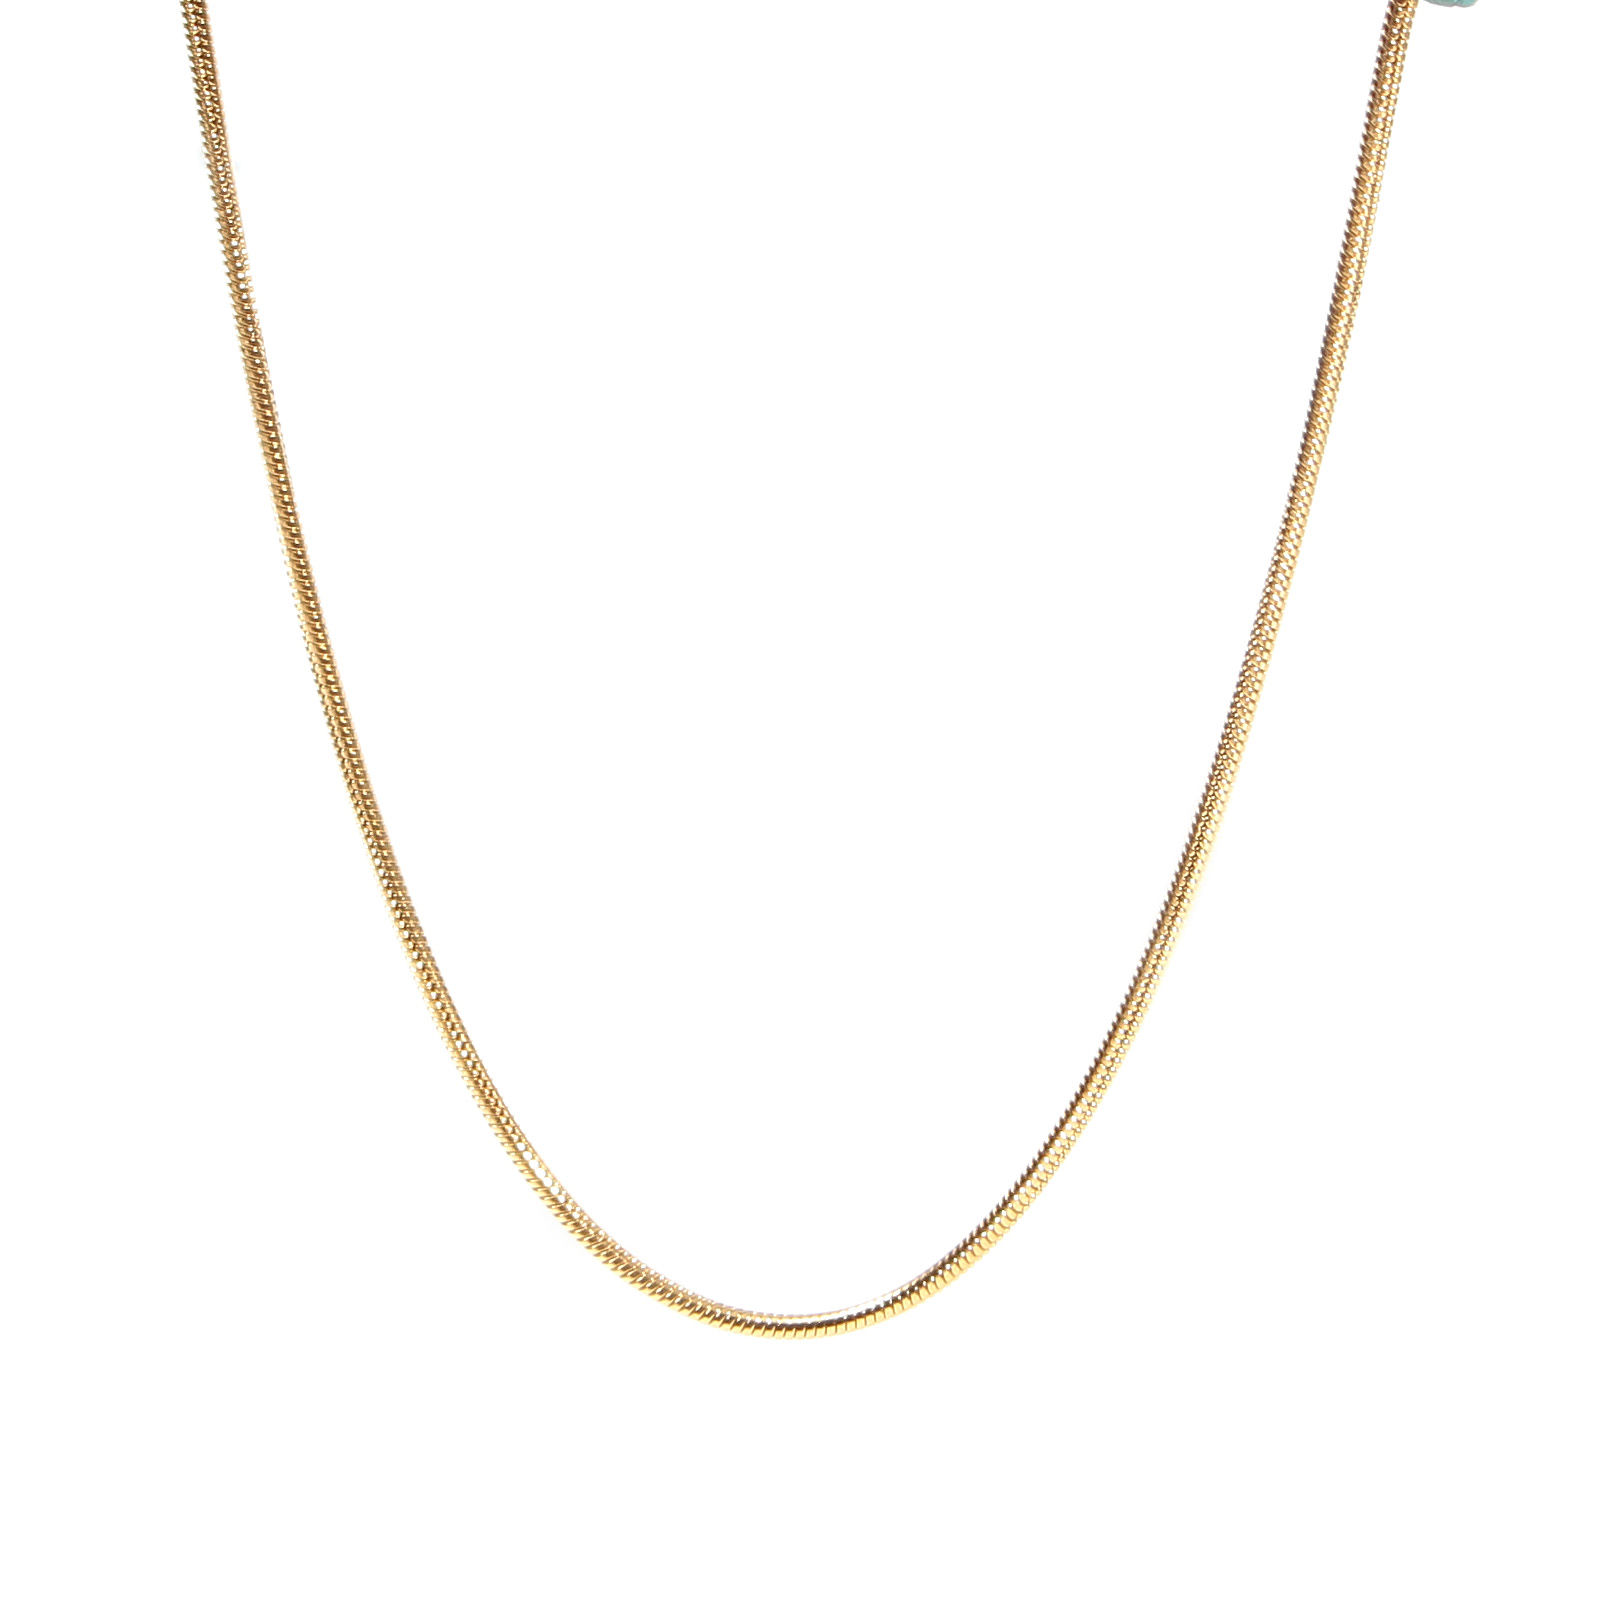 Picture of Stainless Steel Snake Chain Necklace Gold Plated 45cm(17 6/8") long, 1 Piece